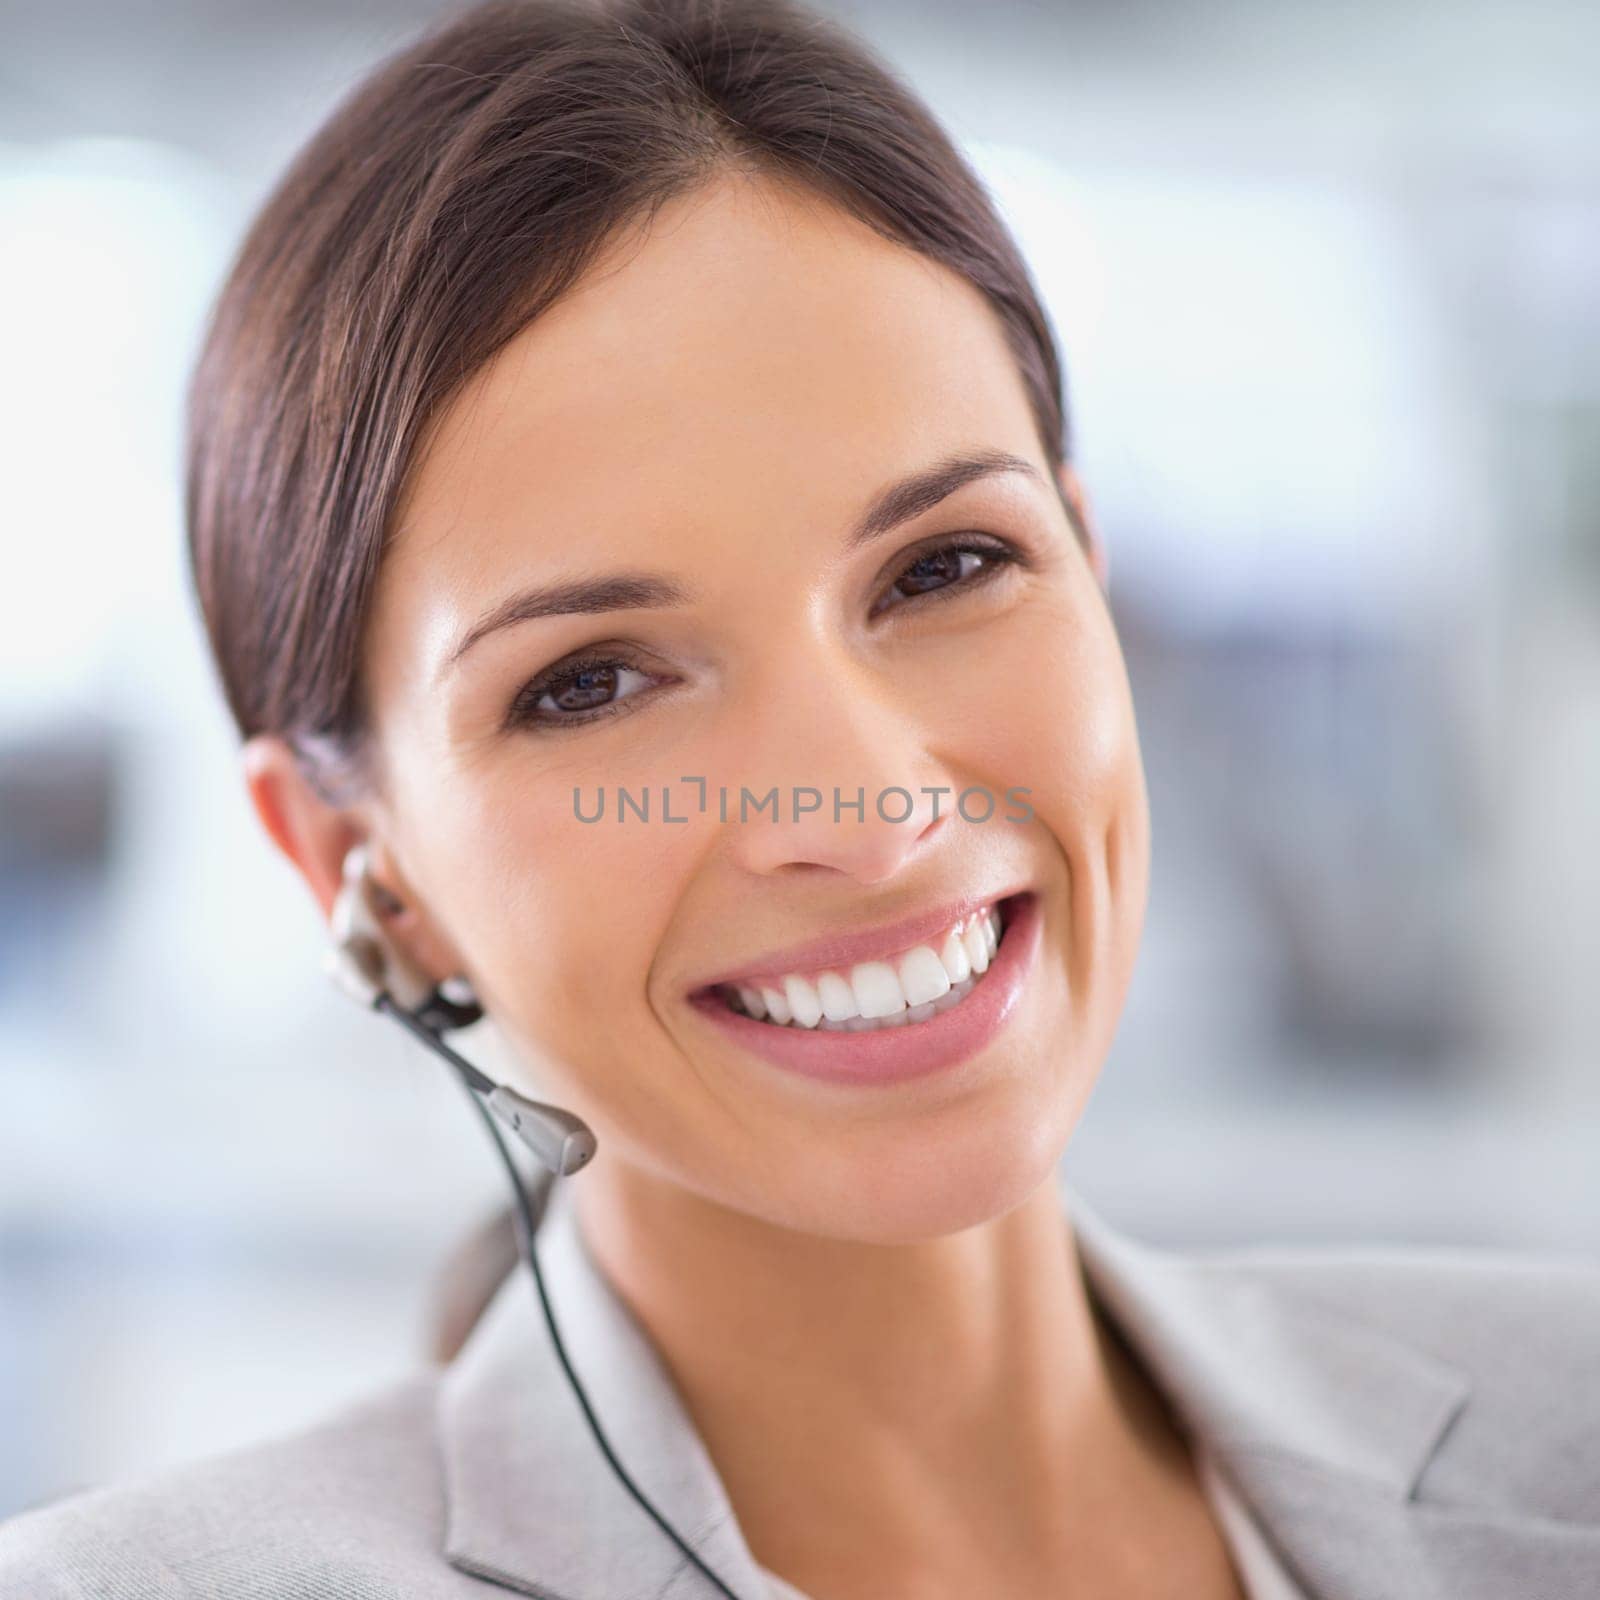 Call center, woman and portrait for telemarketing or communication with headset, happiness and contact us. Customer support, employee and face of agent with consulting, help desk and advisor at work by YuriArcurs